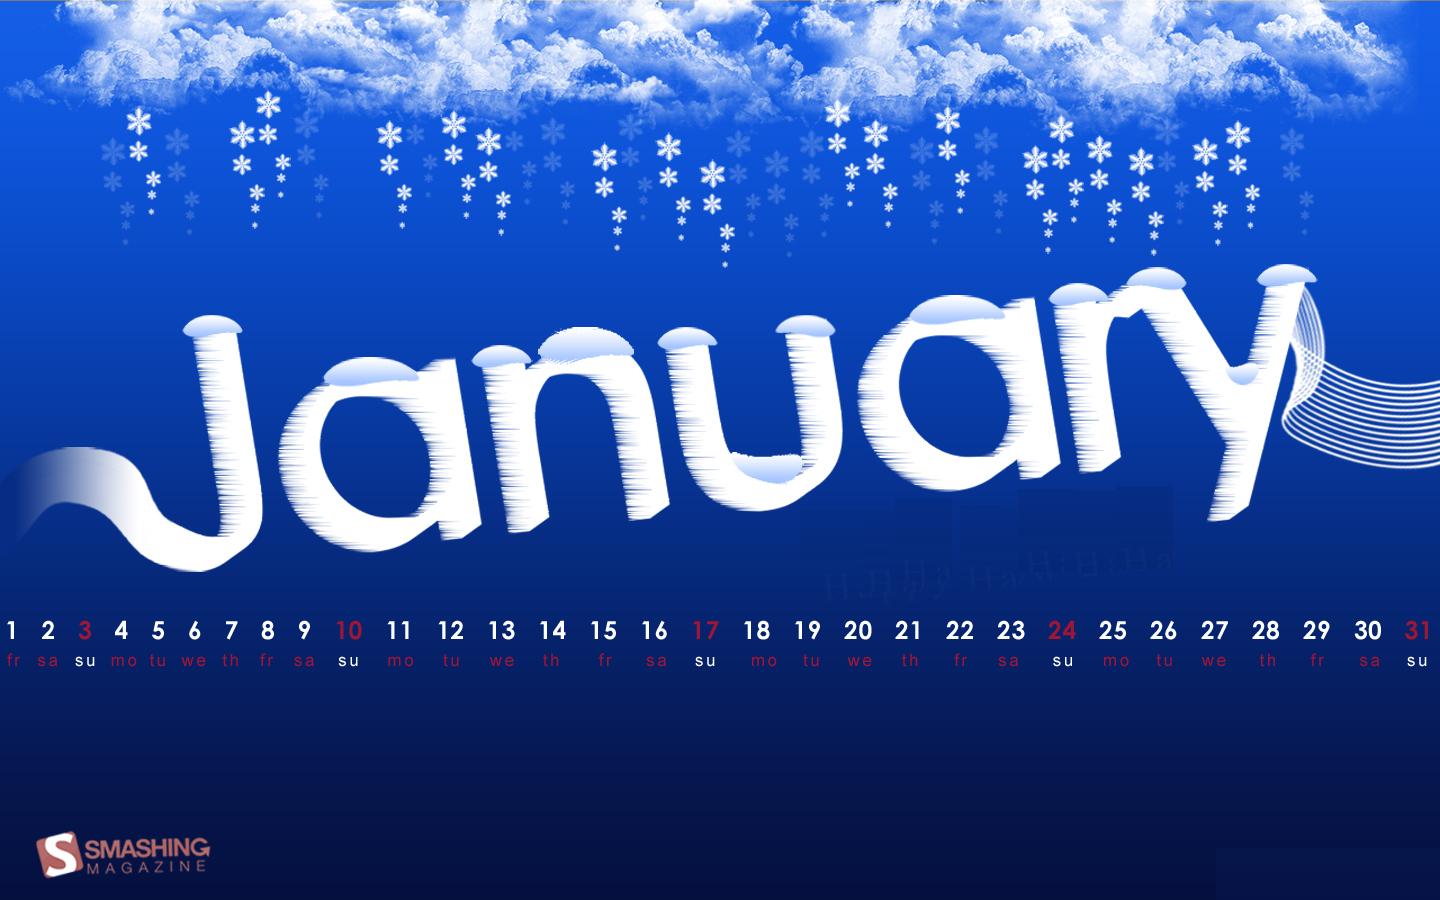 January Wallpaper HD Background Photos Pictures